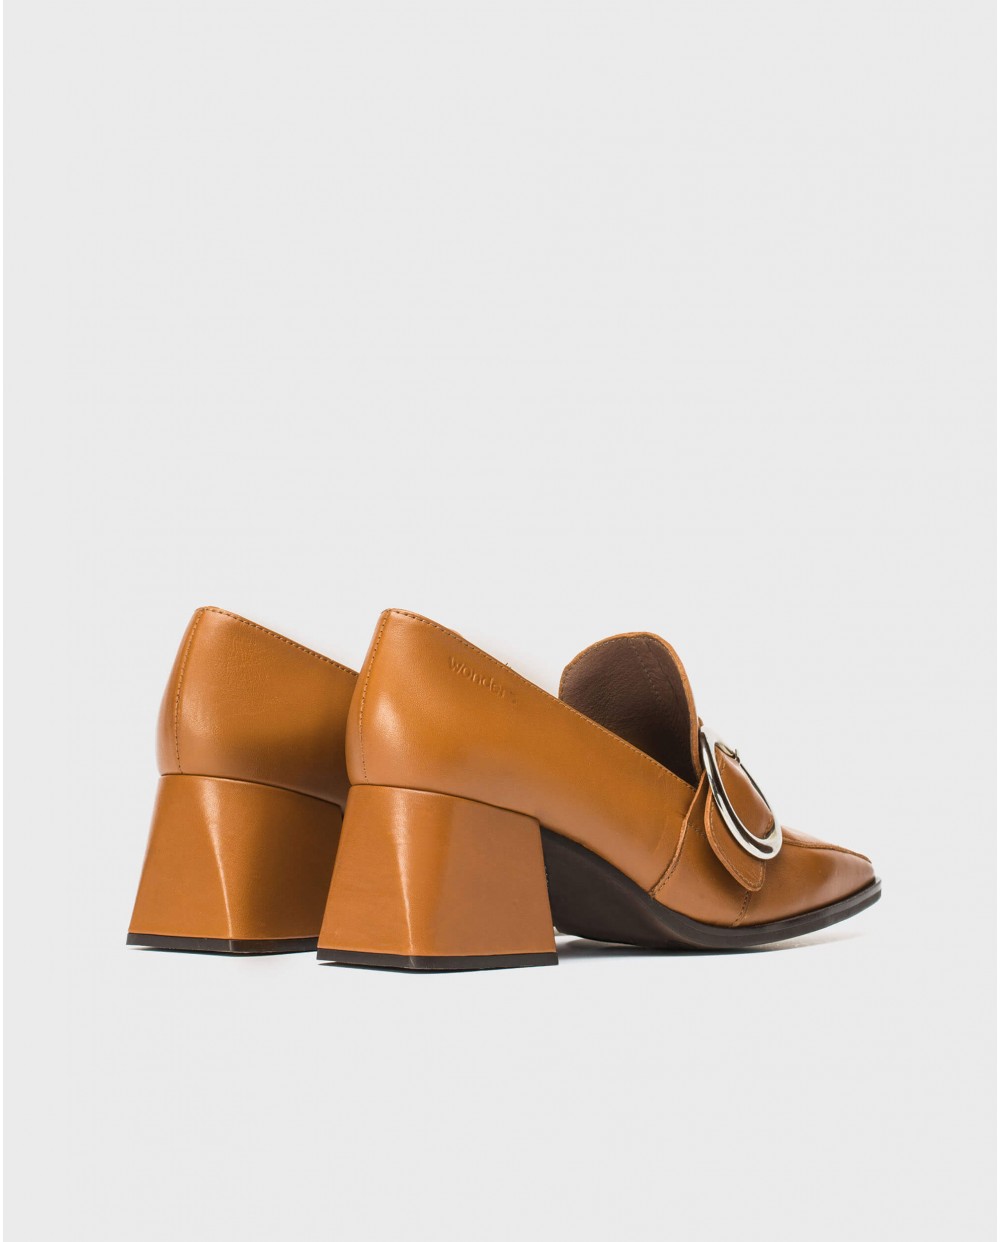 Wonders-Heels-High moccasin with buckle detail